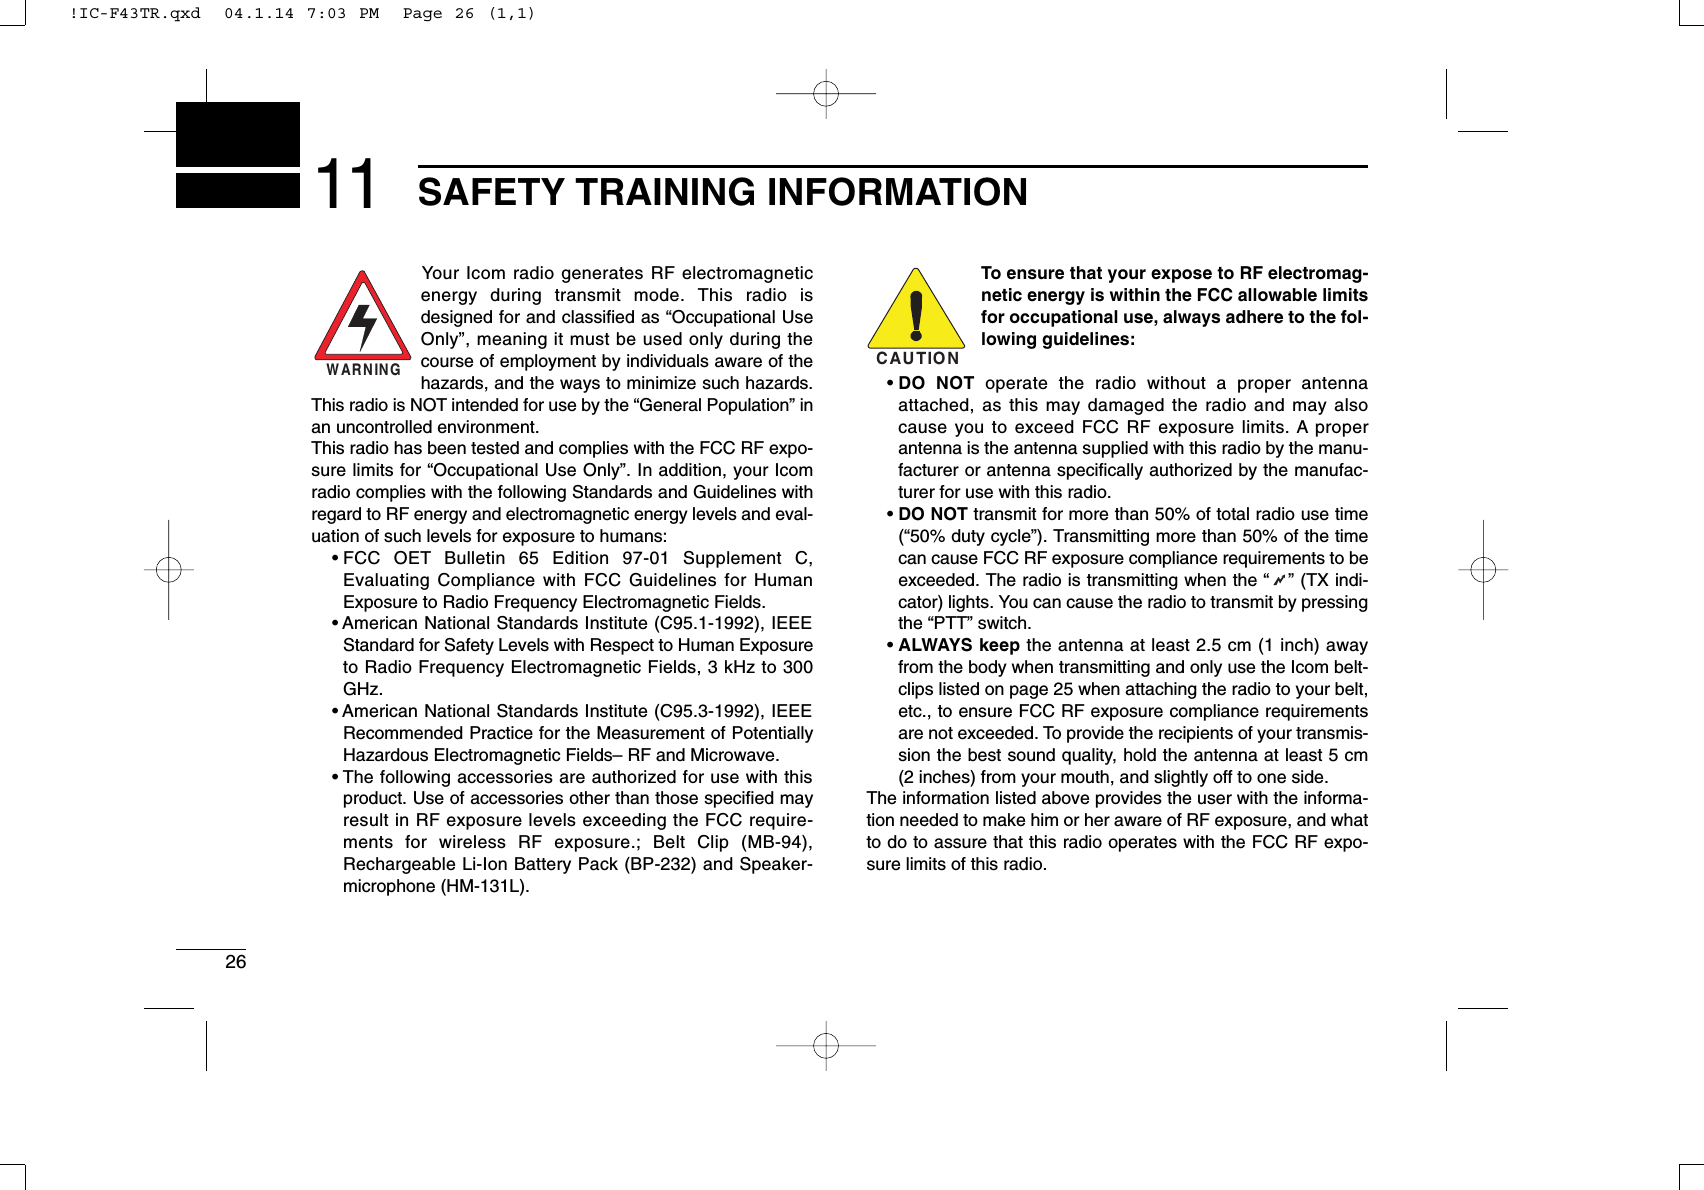 2611 SAFETY TRAINING INFORMATIONYour Icom radio generates RF electromagneticenergy during transmit mode. This radio isdesigned for and classiﬁed as “Occupational UseOnly”, meaning it must be used only during thecourse of employment by individuals aware of thehazards, and the ways to minimize such hazards.This radio is NOT intended for use by the “General Population” inan uncontrolled environment.This radio has been tested and complies with the FCC RF expo-sure limits for “Occupational Use Only”. In addition, your Icomradio complies with the following Standards and Guidelines withregard to RF energy and electromagnetic energy levels and eval-uation of such levels for exposure to humans:• FCC OET Bulletin 65 Edition 97-01 Supplement C,Evaluating Compliance with FCC Guidelines for HumanExposure to Radio Frequency Electromagnetic Fields.• American National Standards Institute (C95.1-1992), IEEEStandard for Safety Levels with Respect to Human Exposureto Radio Frequency Electromagnetic Fields, 3 kHz to 300GHz.• American National Standards Institute (C95.3-1992), IEEERecommended Practice for the Measurement of PotentiallyHazardous Electromagnetic Fields– RF and Microwave.• The following accessories are authorized for use with thisproduct. Use of accessories other than those speciﬁed mayresult in RF exposure levels exceeding the FCC require-ments for wireless RF exposure.; Belt Clip (MB-94),Rechargeable Li-Ion Battery Pack (BP-232) and Speaker-microphone (HM-131L).To ensure that your expose to RF electromag-netic energy is within the FCC allowable limitsfor occupational use, always adhere to the fol-lowing guidelines:• DO NOT operate the radio without a proper antennaattached, as this may damaged the radio and may alsocause you to exceed FCC RF exposure limits. A properantenna is the antenna supplied with this radio by the manu-facturer or antenna speciﬁcally authorized by the manufac-turer for use with this radio.• DO NOT transmit for more than 50% of total radio use time(“50% duty cycle”). Transmitting more than 50% of the timecan cause FCC RF exposure compliance requirements to beexceeded. The radio is transmitting when the “” (TX indi-cator) lights. You can cause the radio to transmit by pressingthe “PTT” switch.• ALWAYS keep the antenna at least 2.5 cm (1 inch) awayfrom the body when transmitting and only use the Icom belt-clips listed on page 25 when attaching the radio to your belt,etc., to ensure FCC RF exposure compliance requirementsare not exceeded. To provide the recipients of your transmis-sion the best sound quality, hold the antenna at least 5 cm(2 inches) from your mouth, and slightly off to one side.The information listed above provides the user with the informa-tion needed to make him or her aware of RF exposure, and whatto do to assure that this radio operates with the FCC RF expo-sure limits of this radio.CAUTIONWARNING!IC-F43TR.qxd  04.1.14 7:03 PM  Page 26 (1,1)